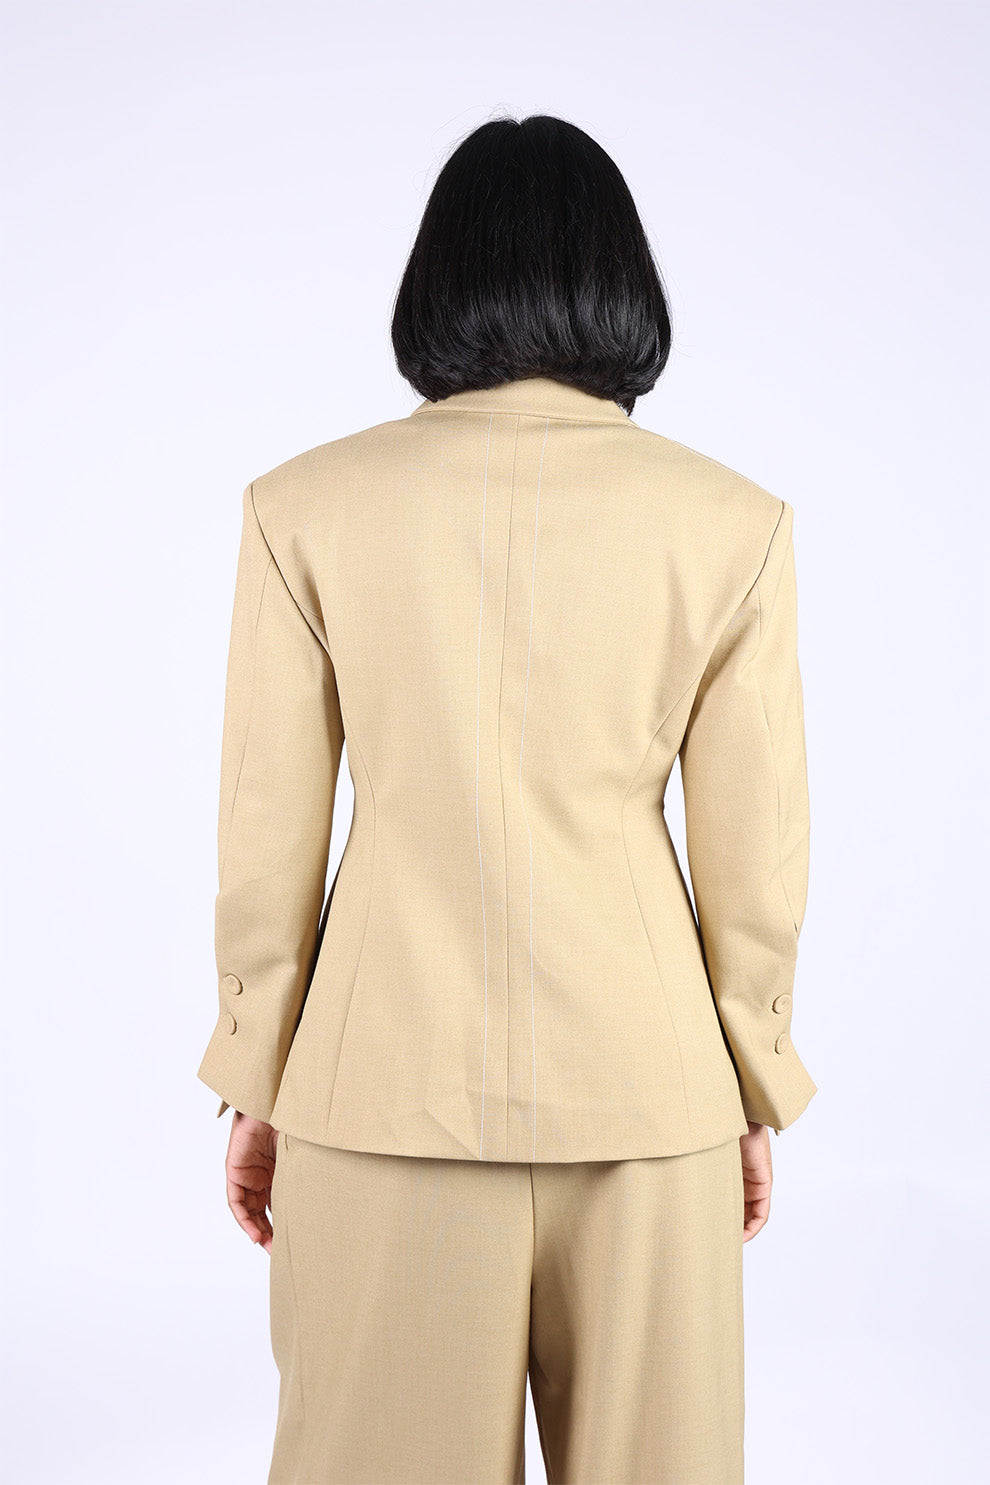 Beige Cotton V-Neck Suit with Matching Pants